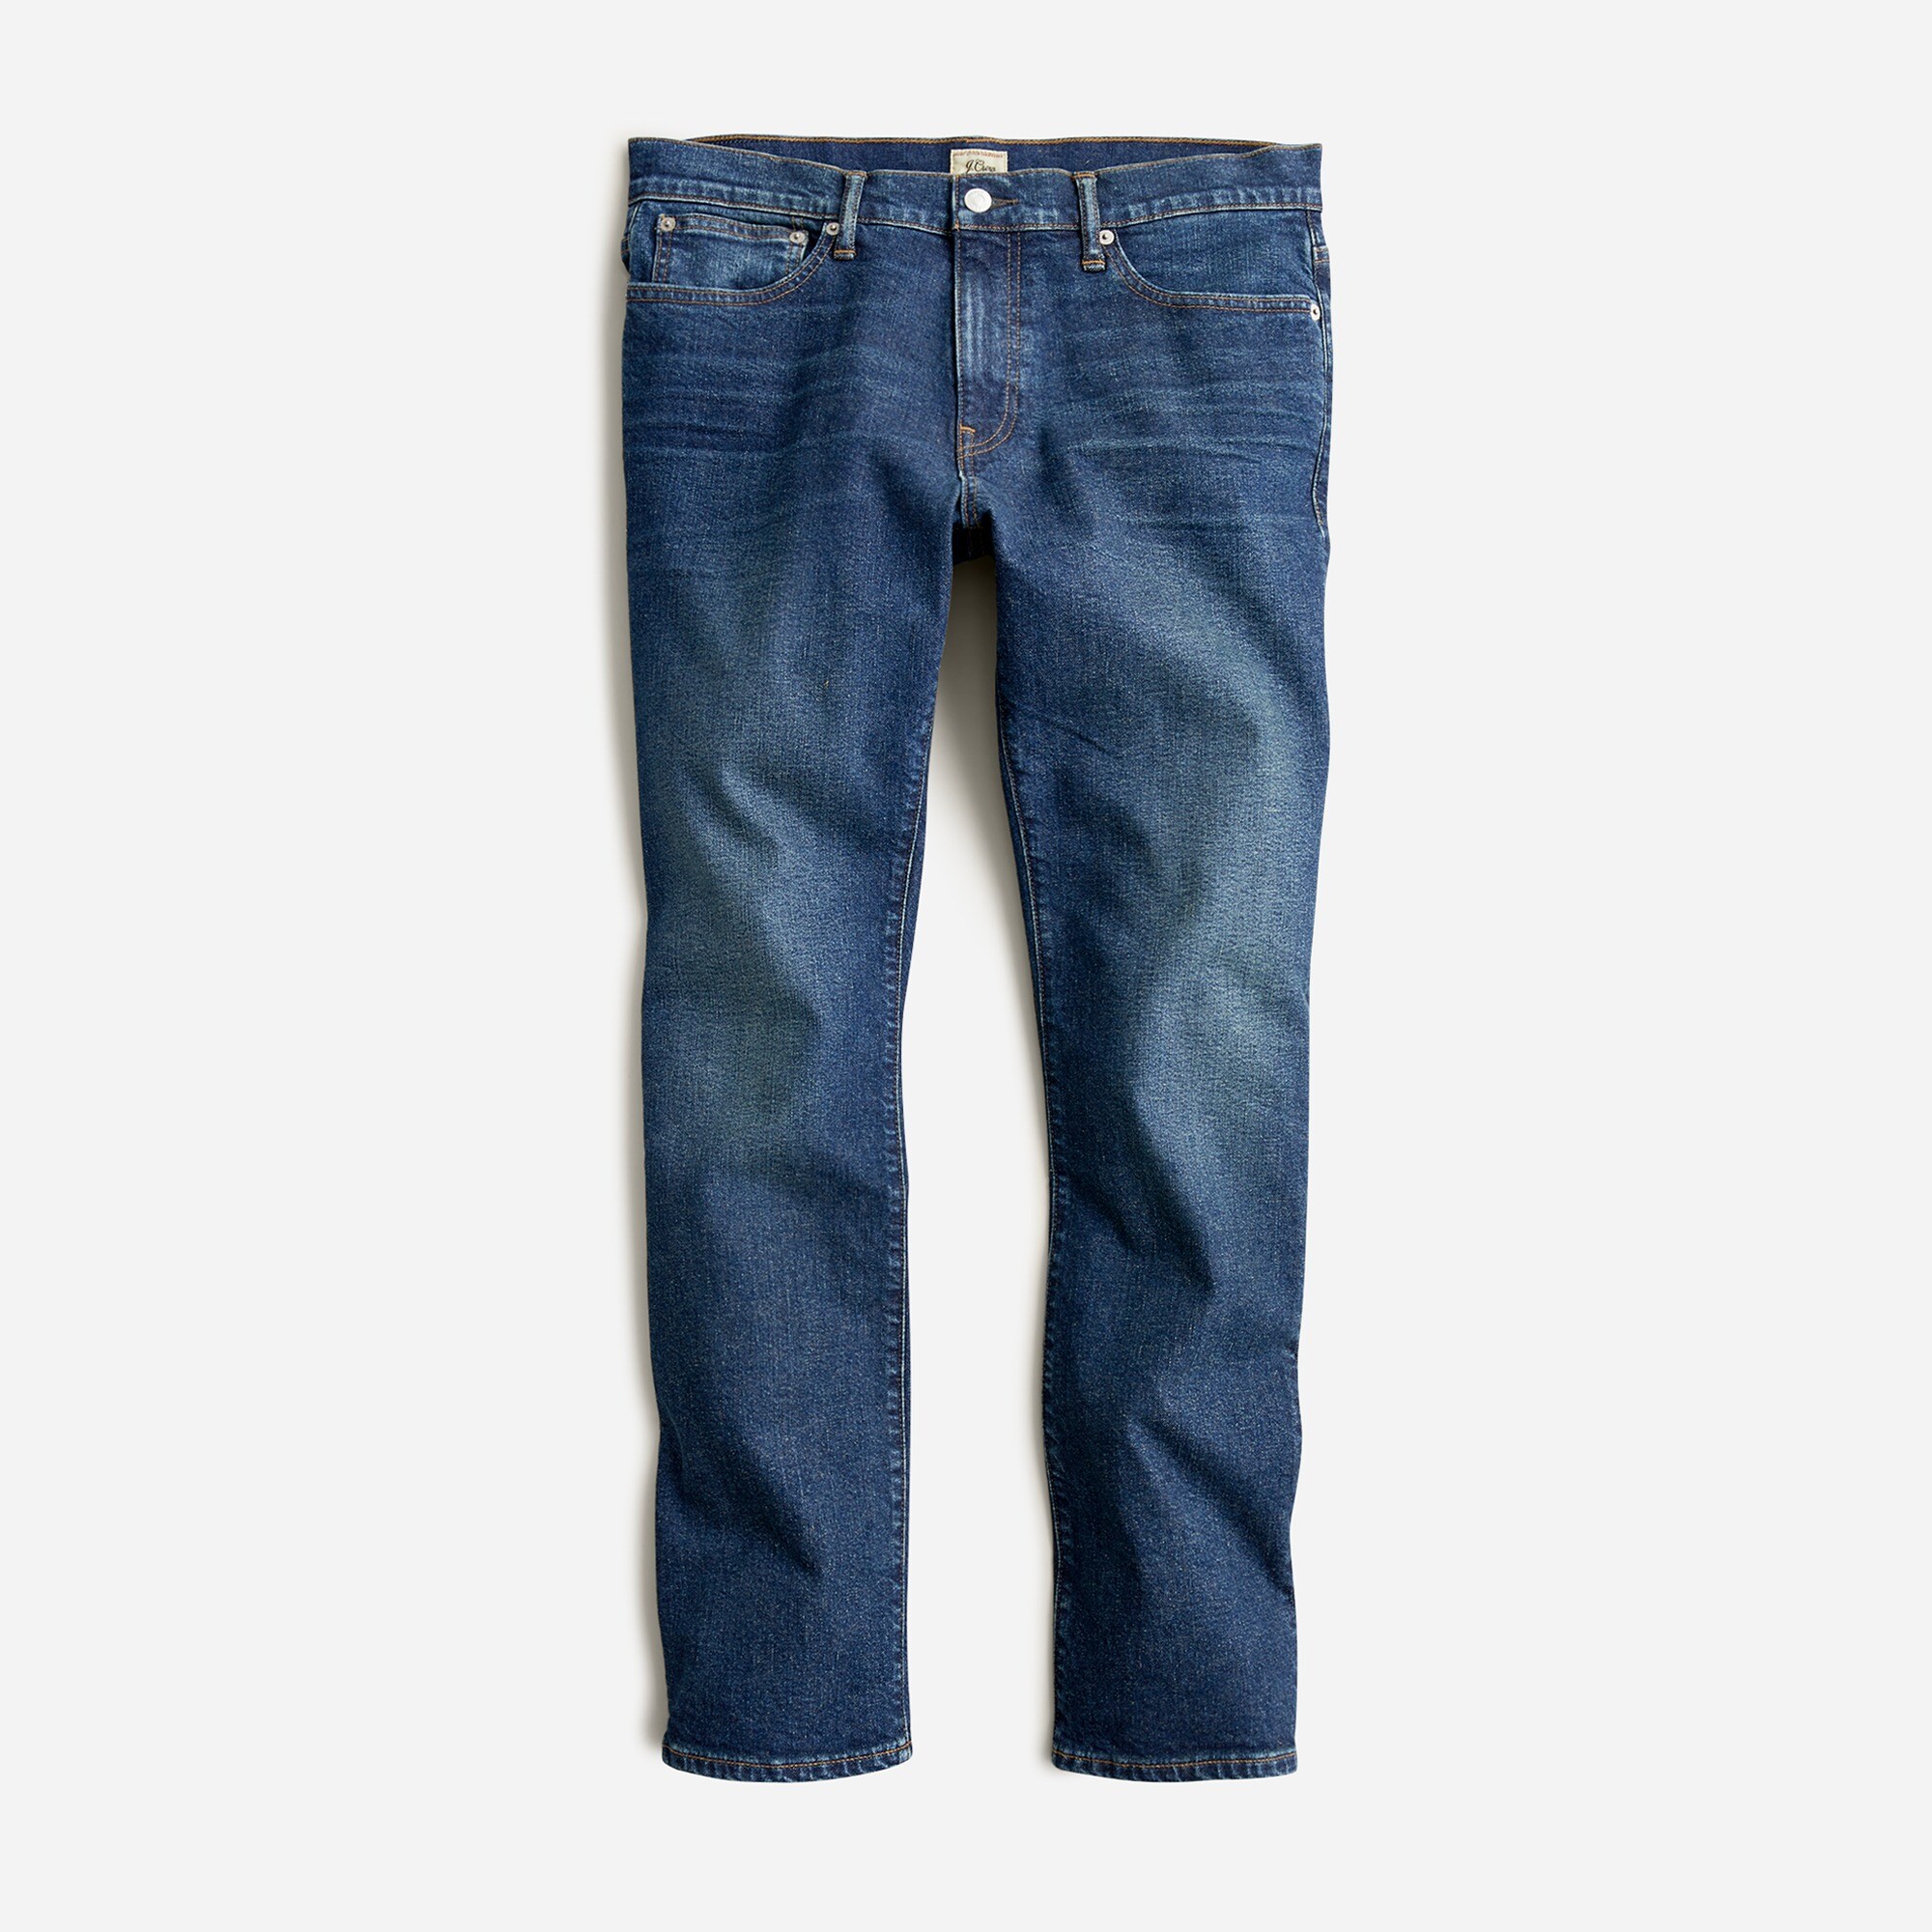  770™ Straight-fit stretch jean in one-year wash